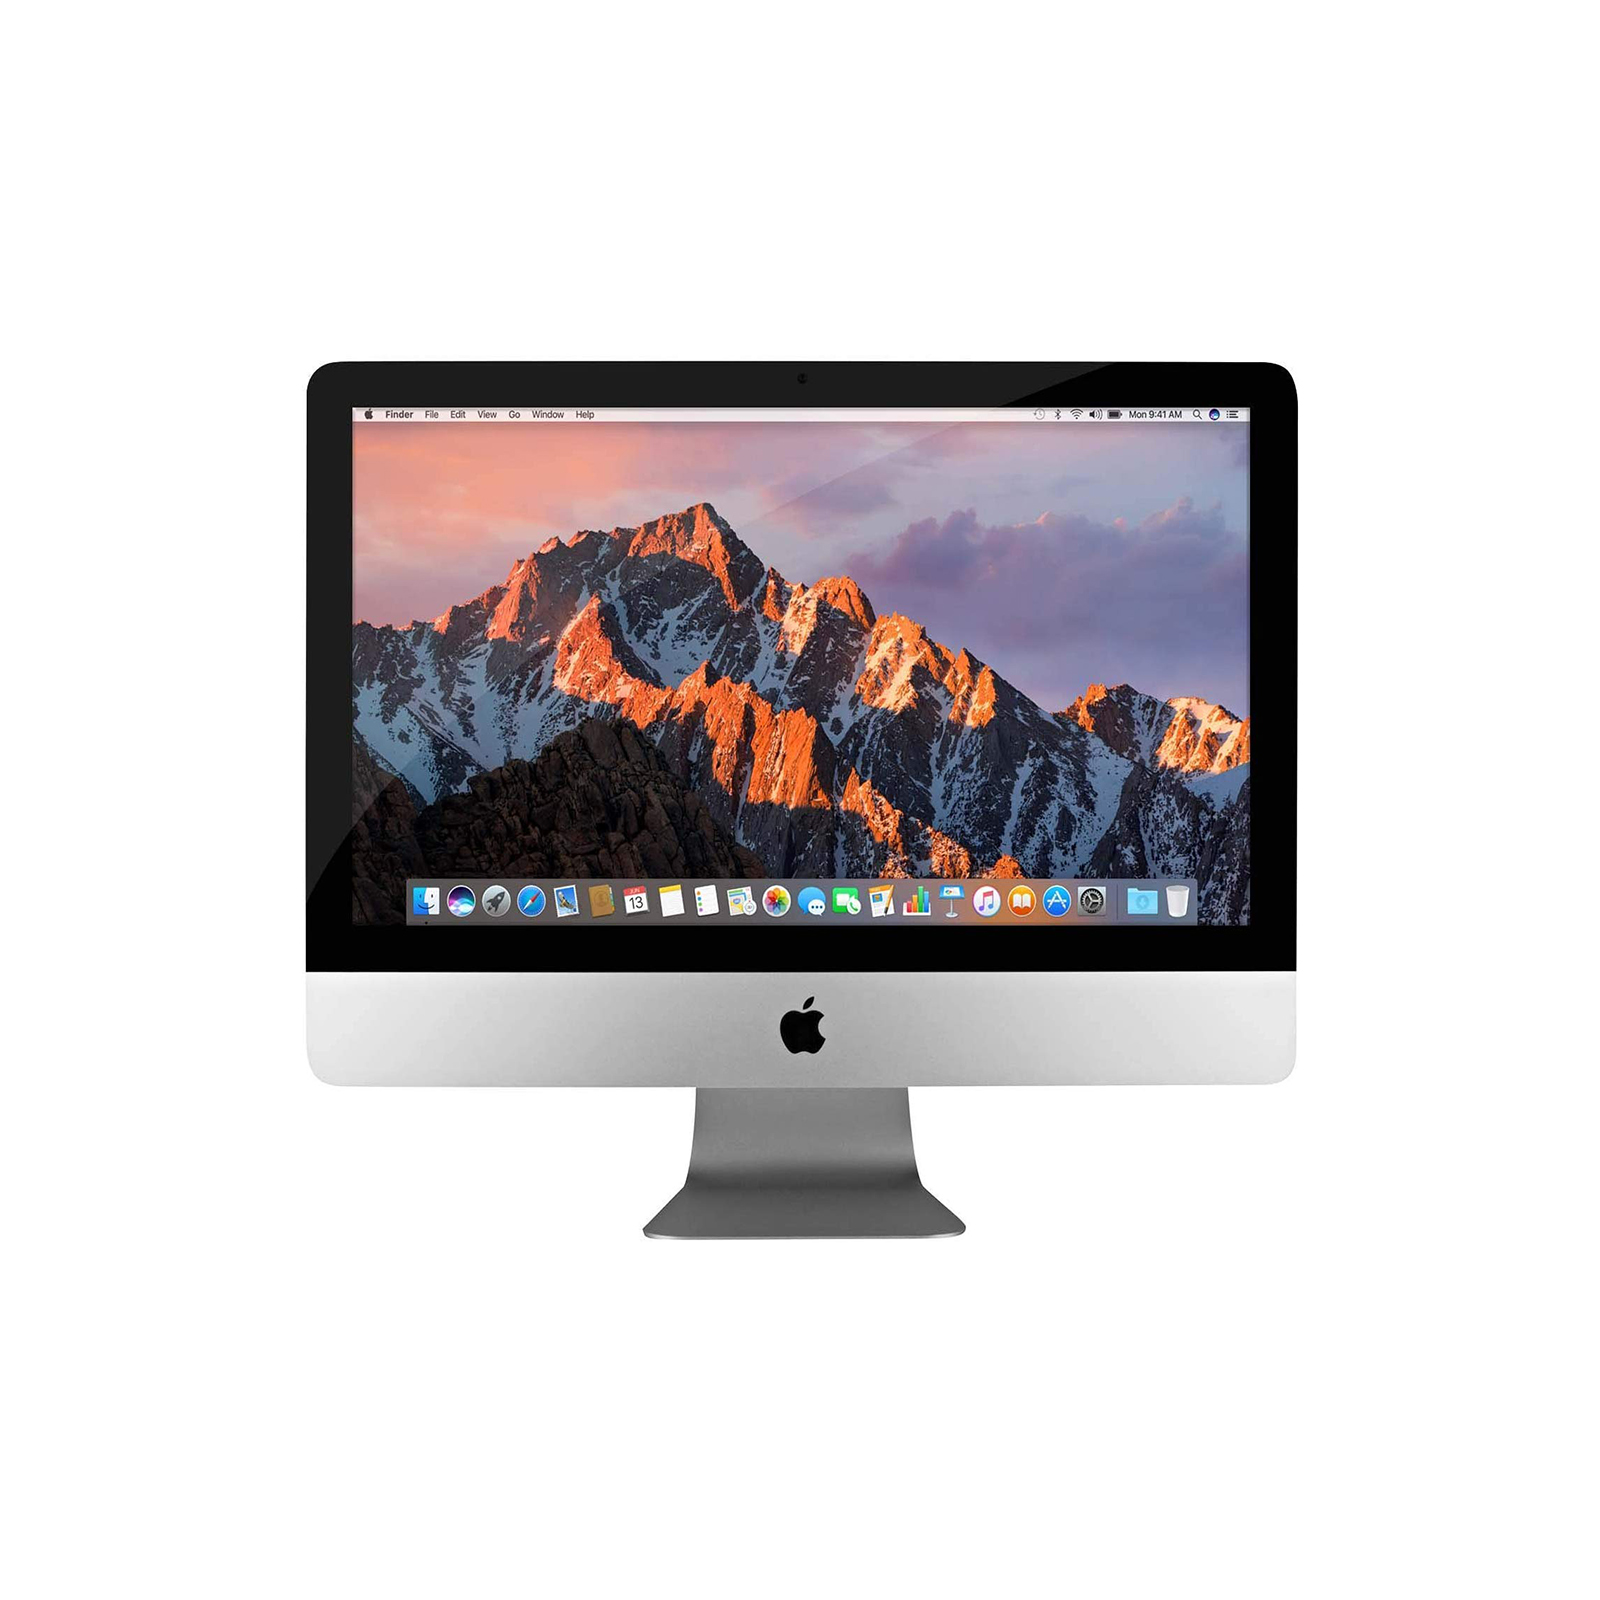 Apple iMac 27" Late 2014 - Excellent / Very Good / Good Condition